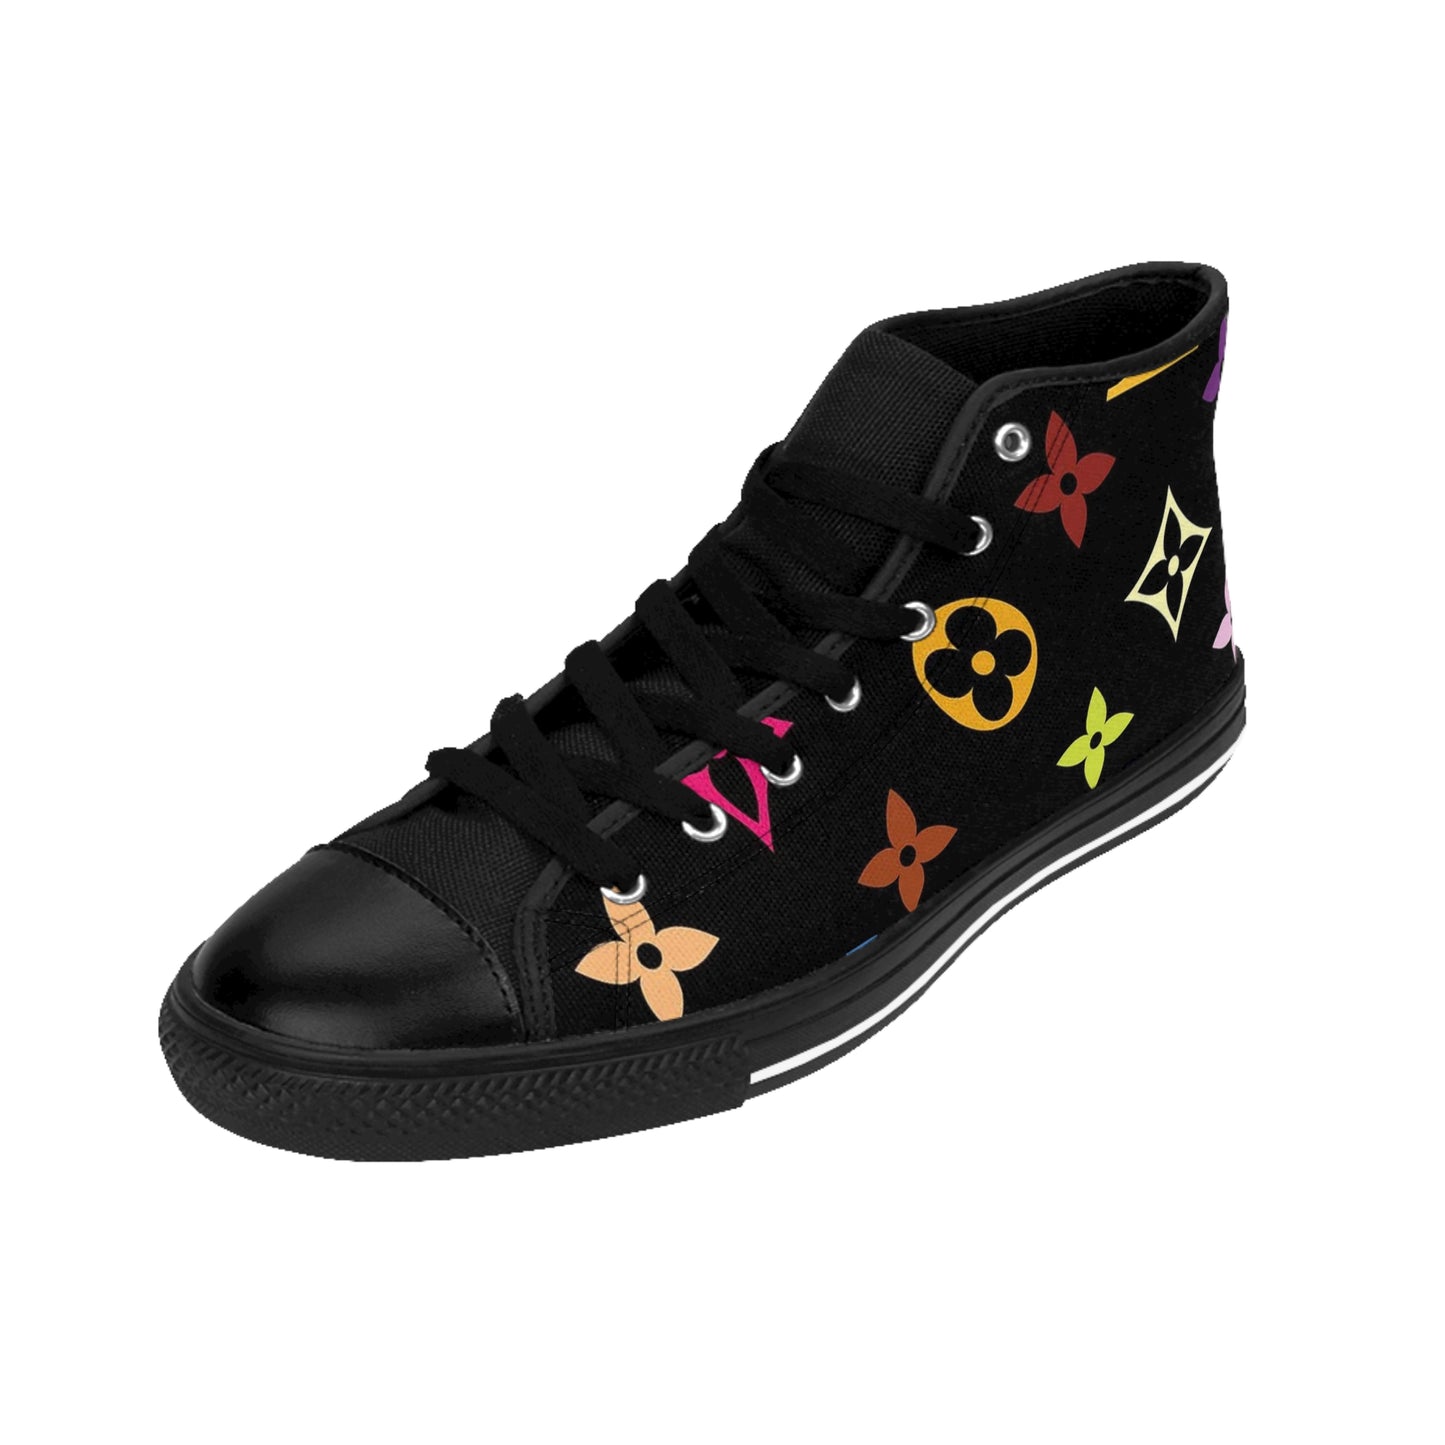 T4x Women's In Color Fashion Classic High Top Sneakers